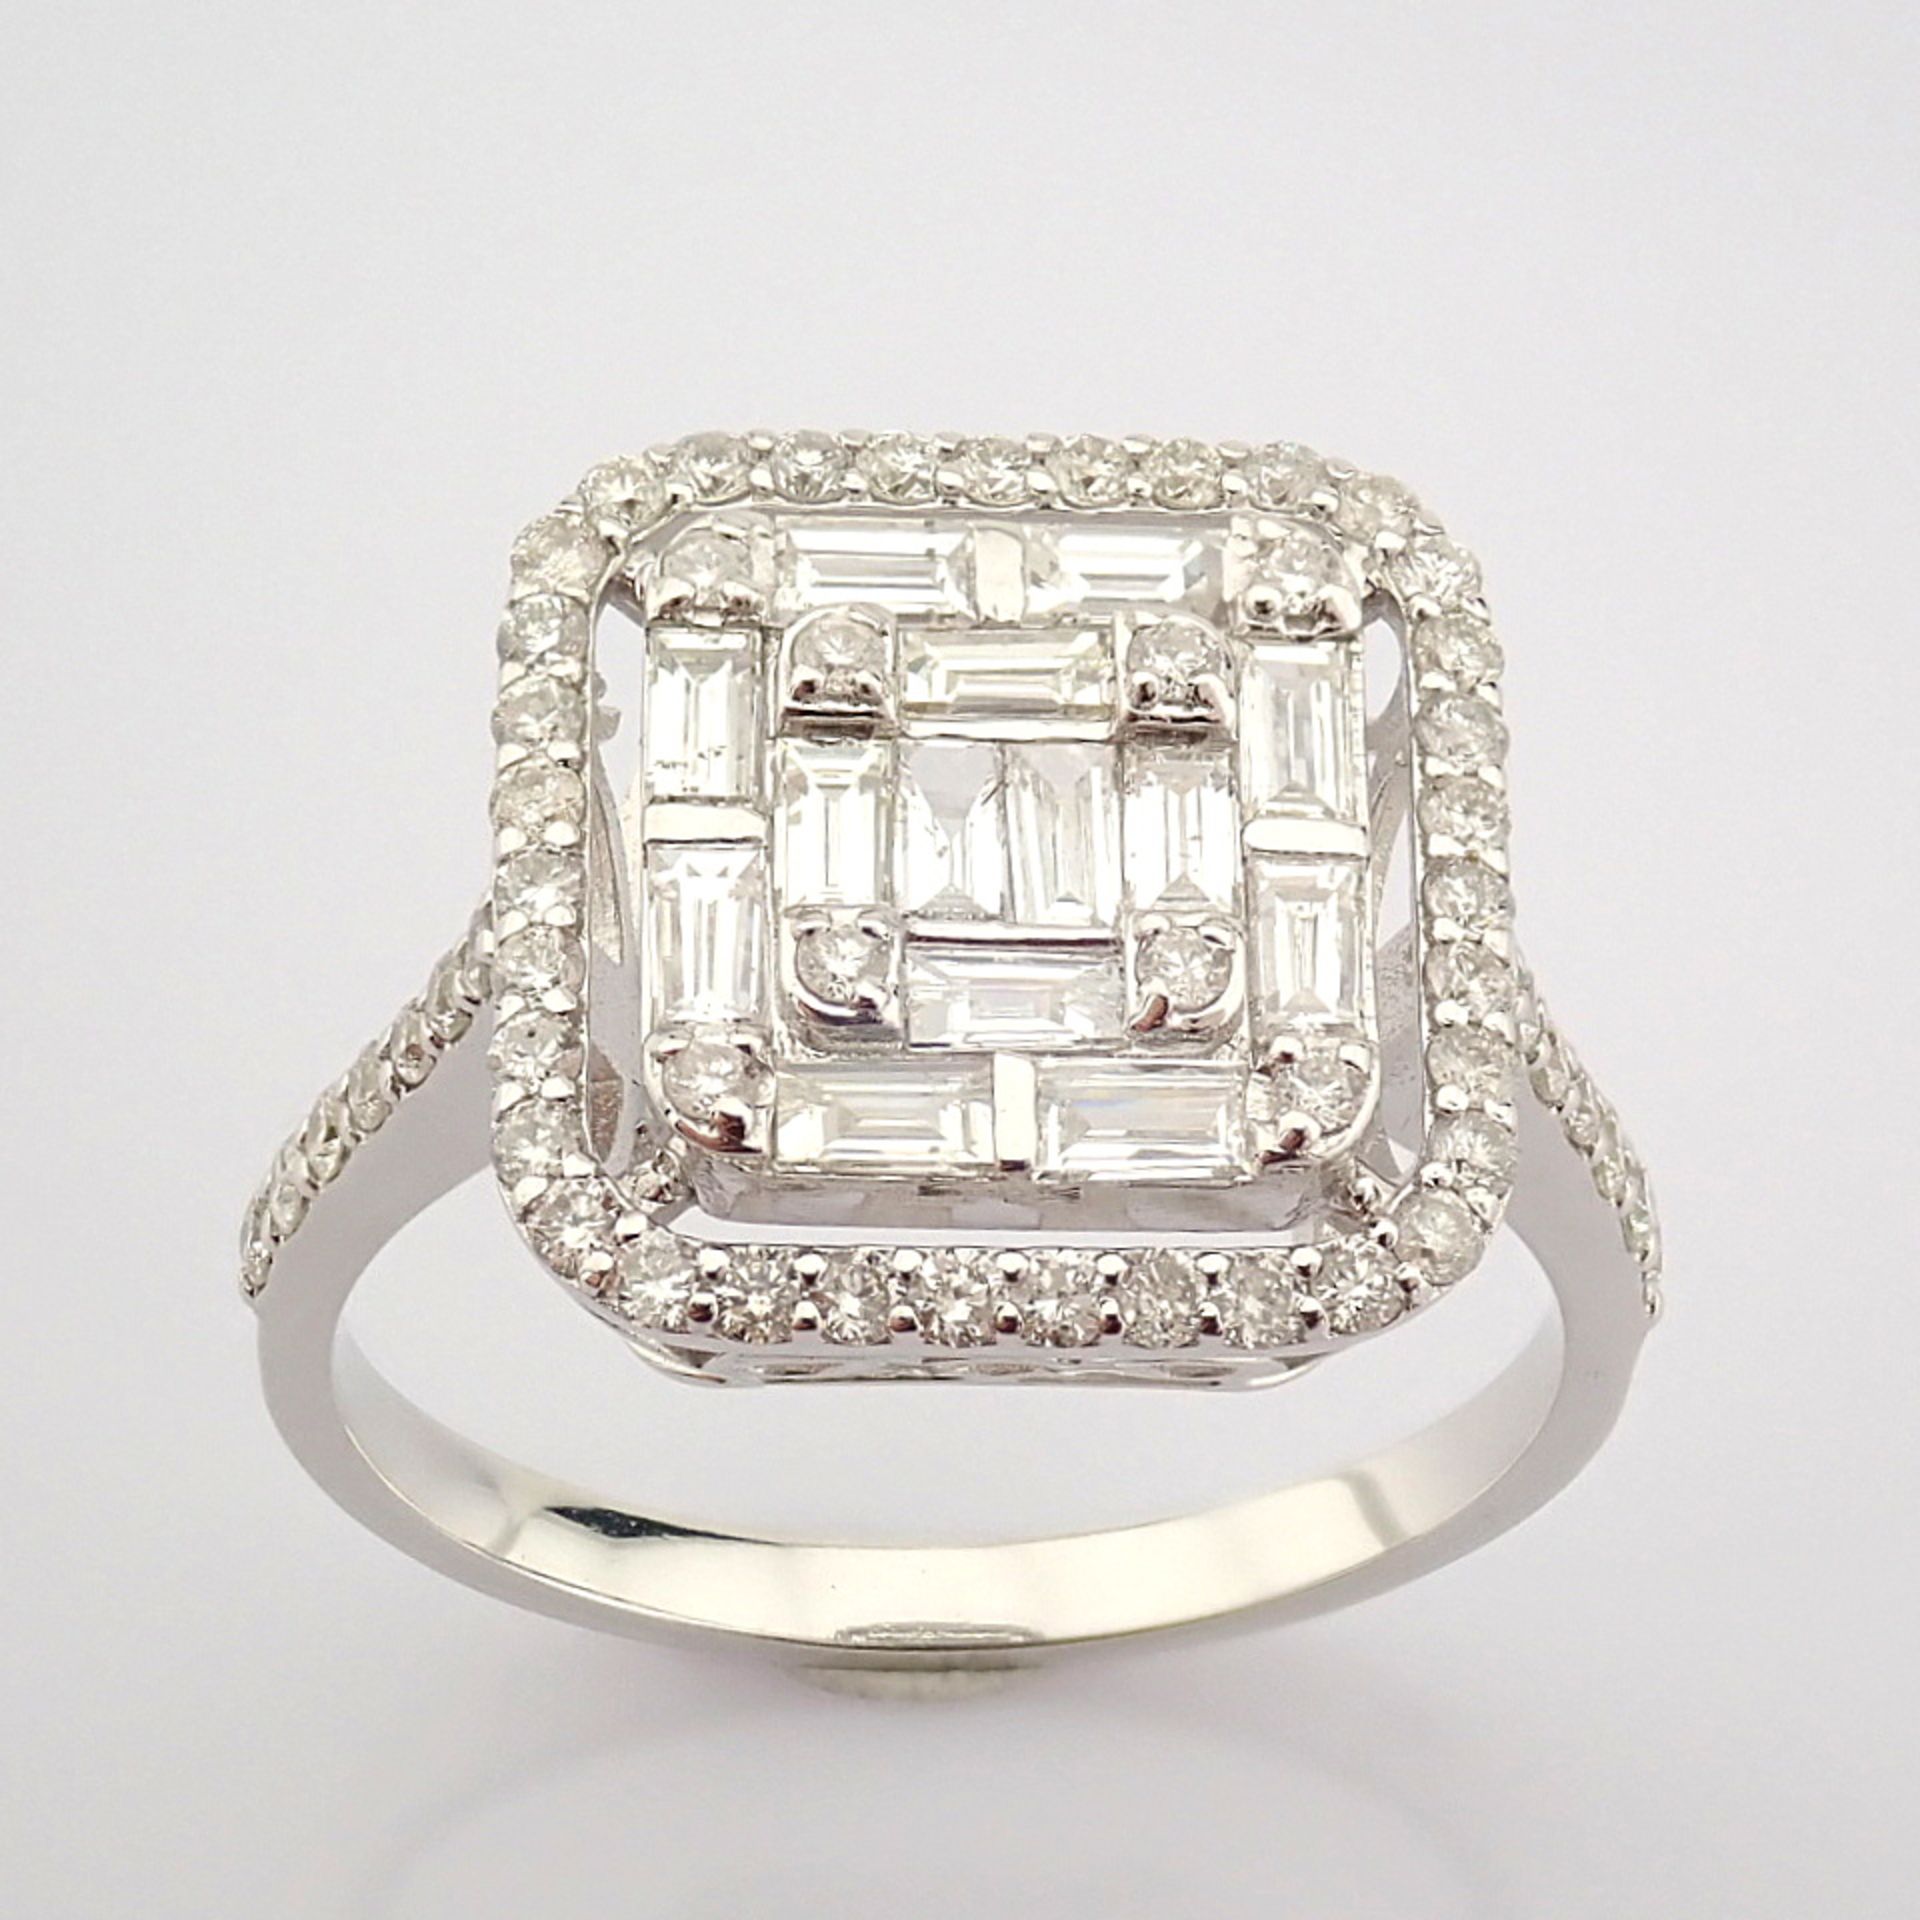 Certificated 14K White Gold Diamond Ring / Total 0.99 ct